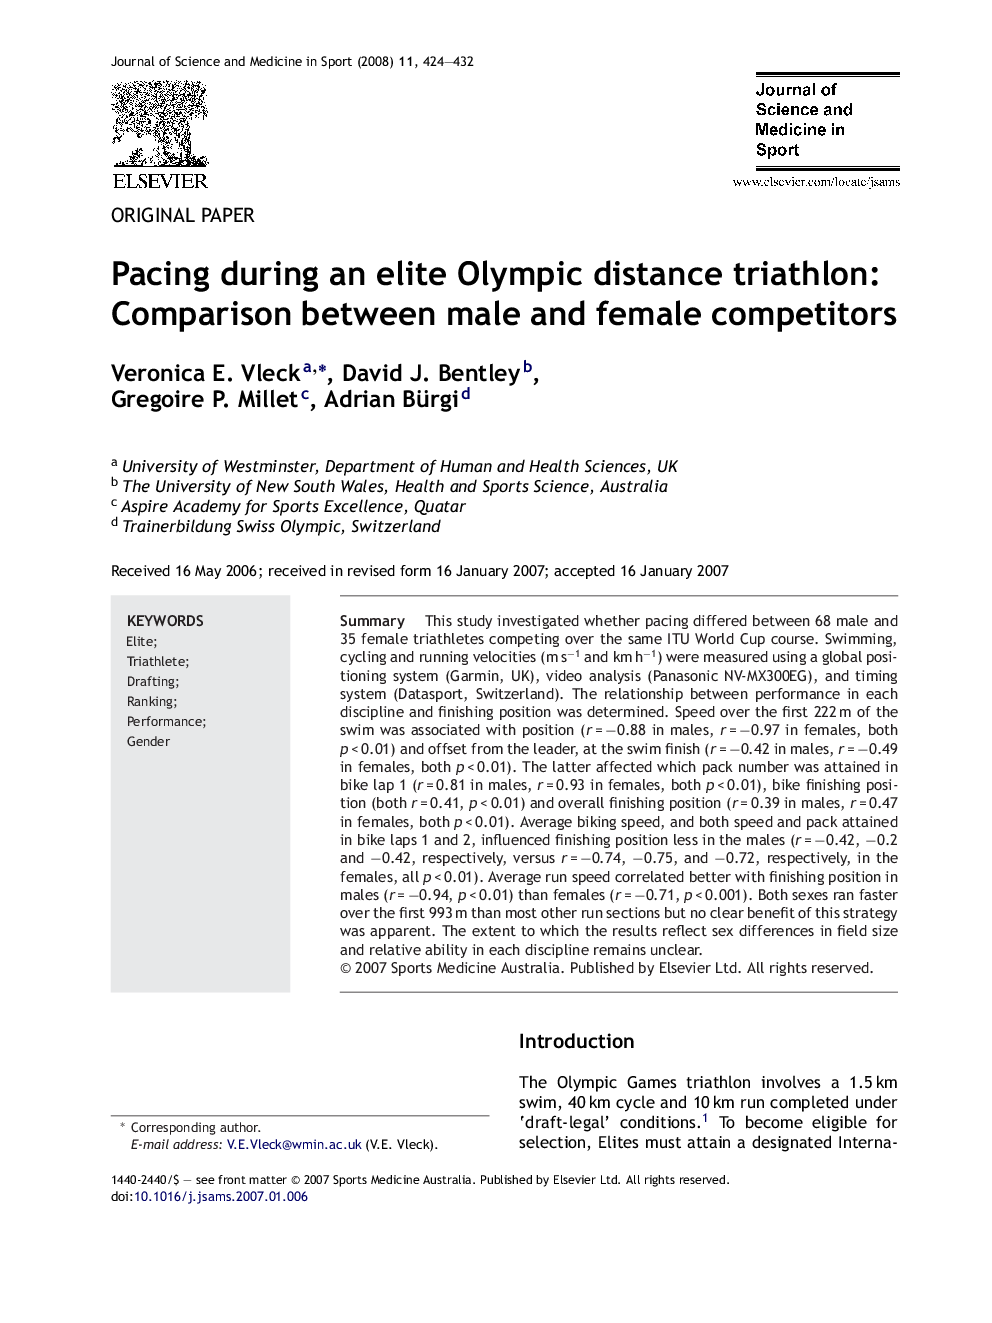 Pacing during an elite Olympic distance triathlon: Comparison between male and female competitors